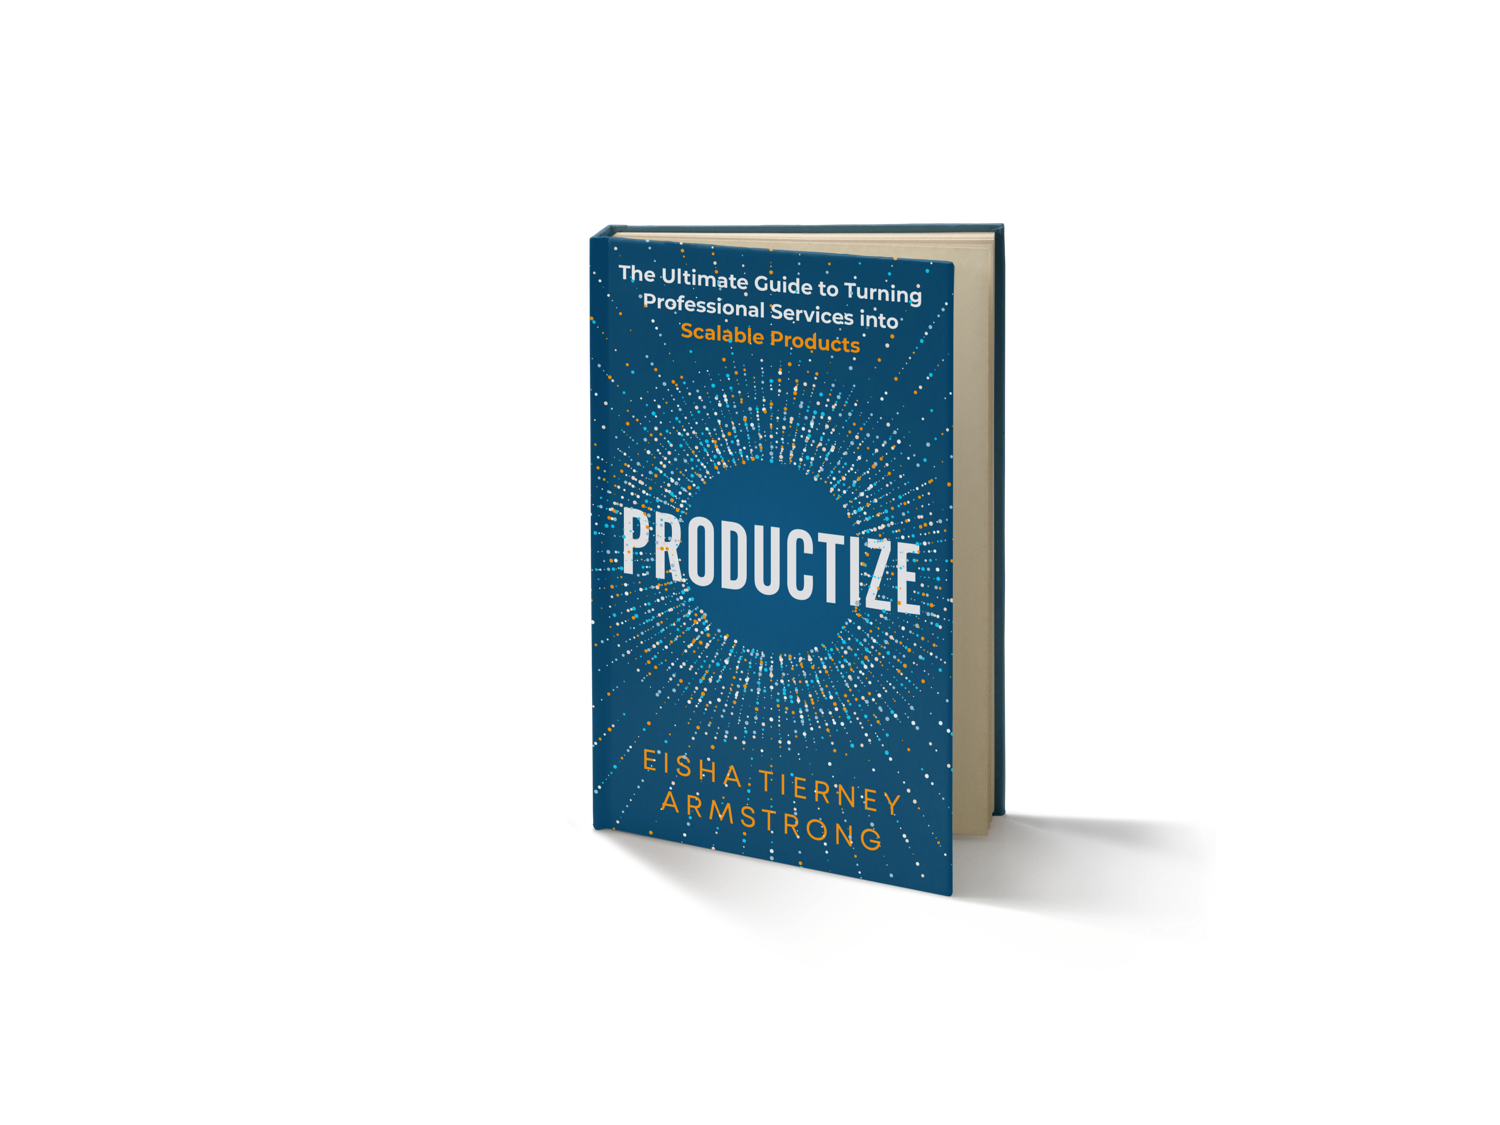 Productize: Turning Services into Scalable Products